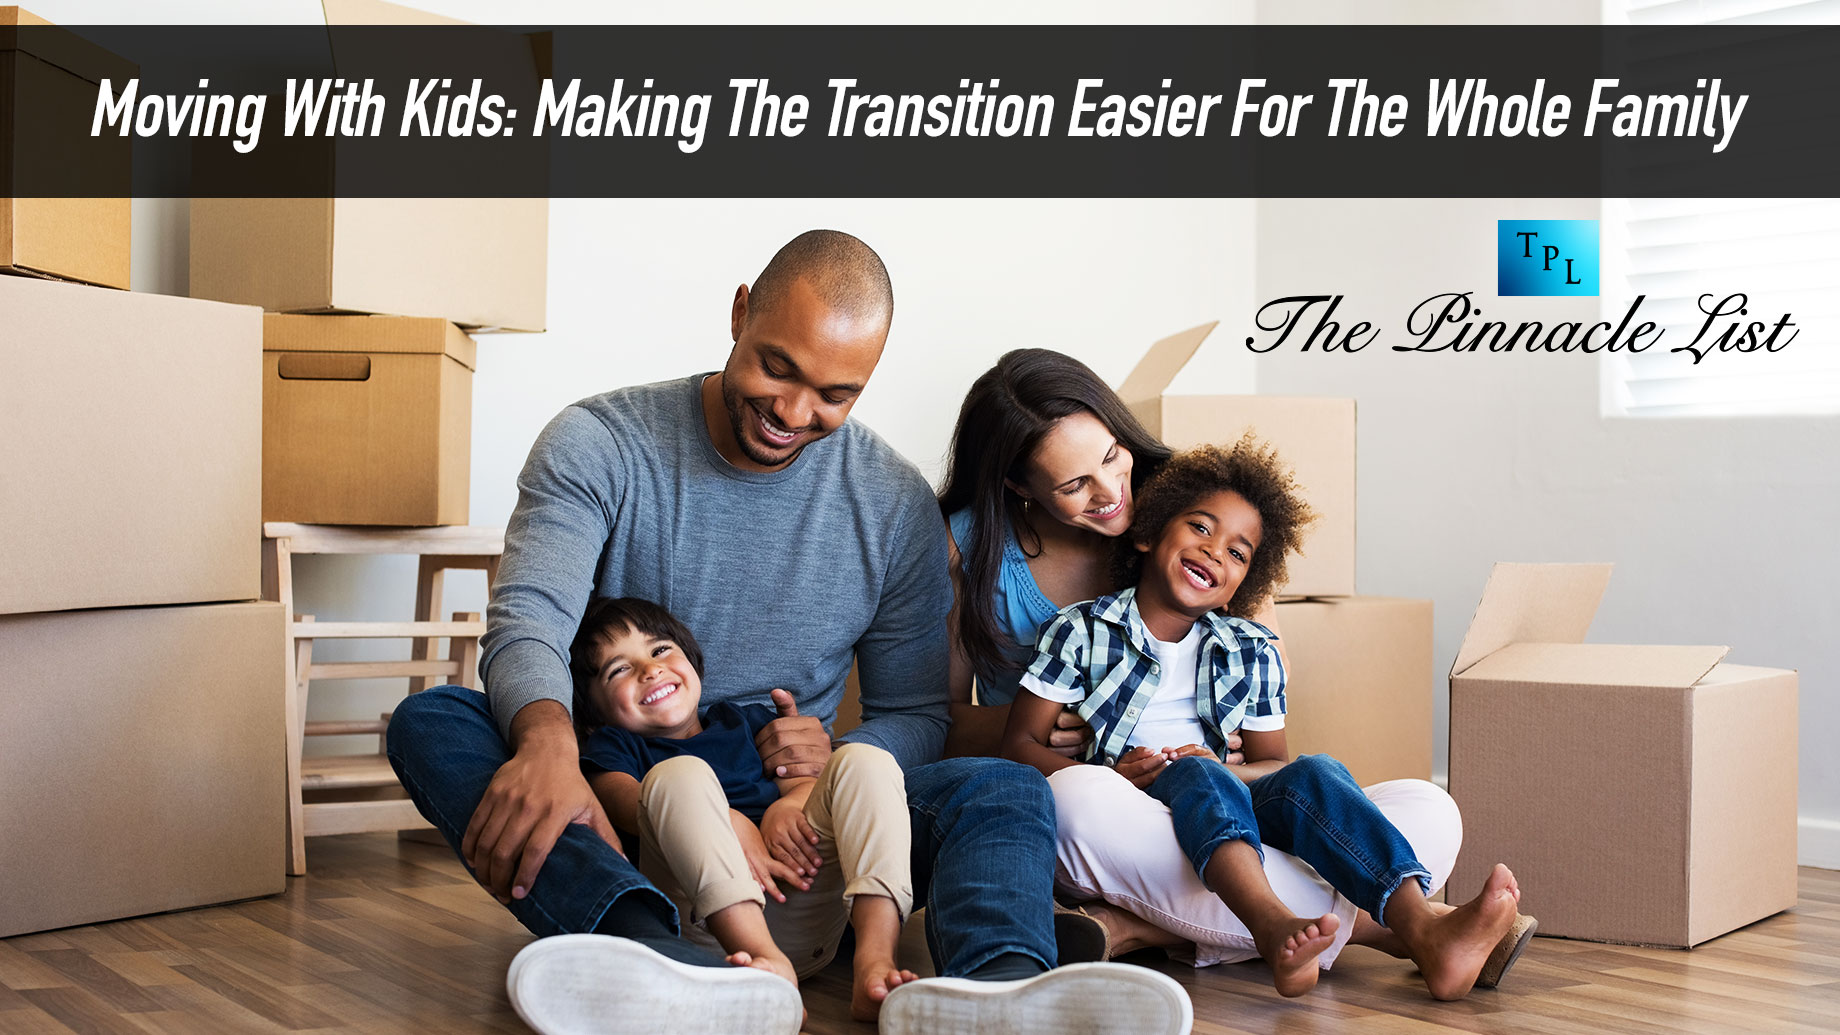 Moving With Kids: Making The Transition Easier For The Whole Family